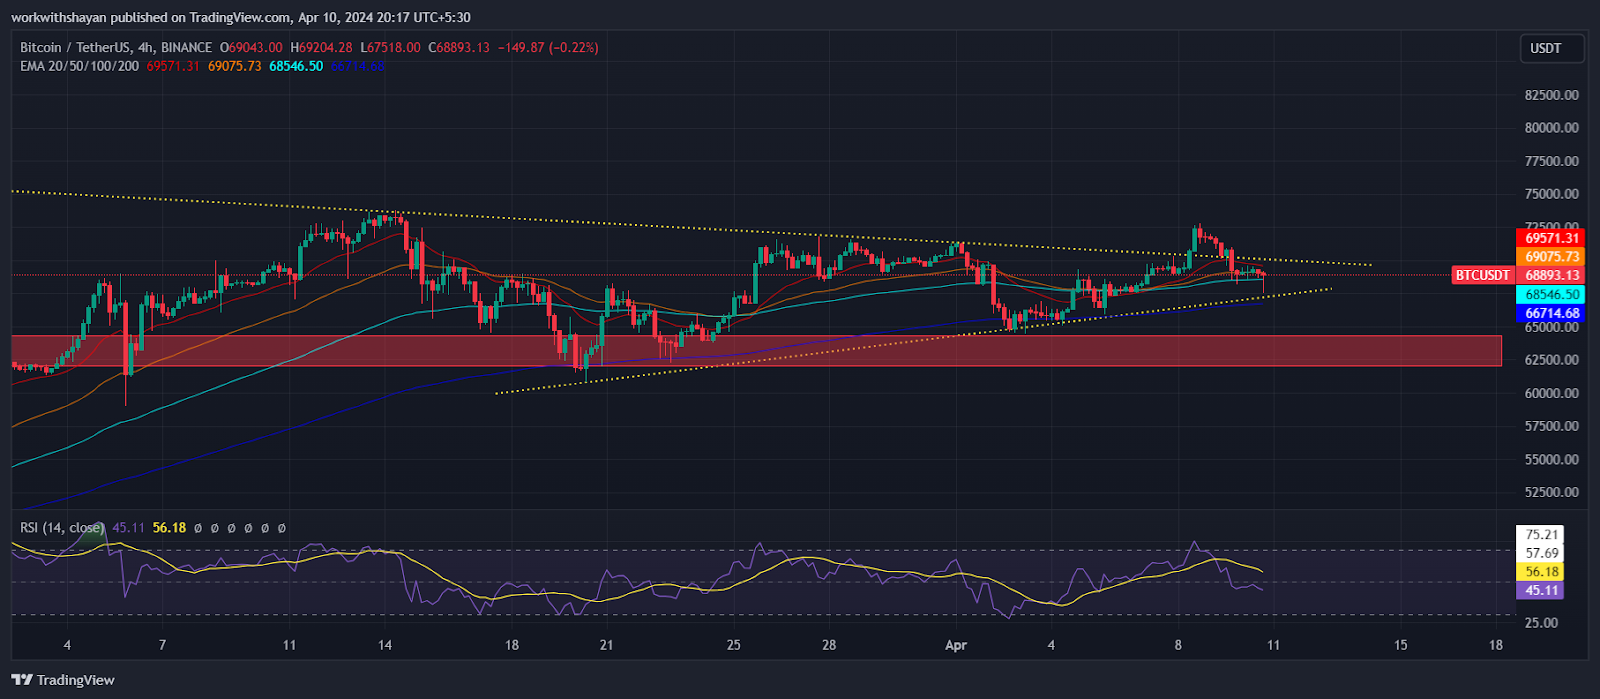 Bitcoin Price Tests Support Of This Pattern Amid Rising Inflation! Will BTC Price Plunge Hard?